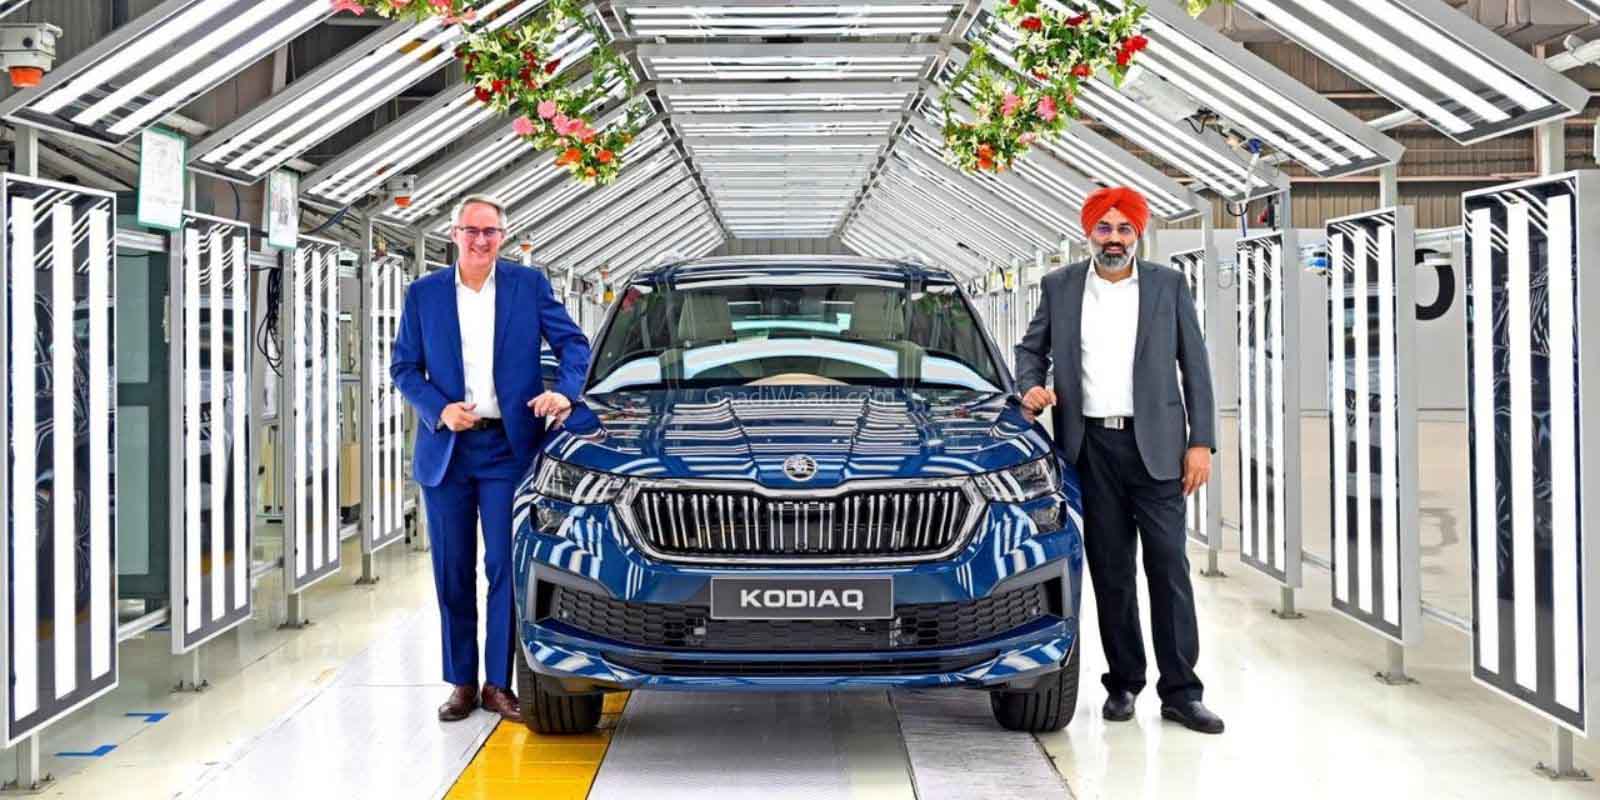 2022 Skoda Kodiaq Facelift Prices To Start At Rs. 36.50 Lakh - Report